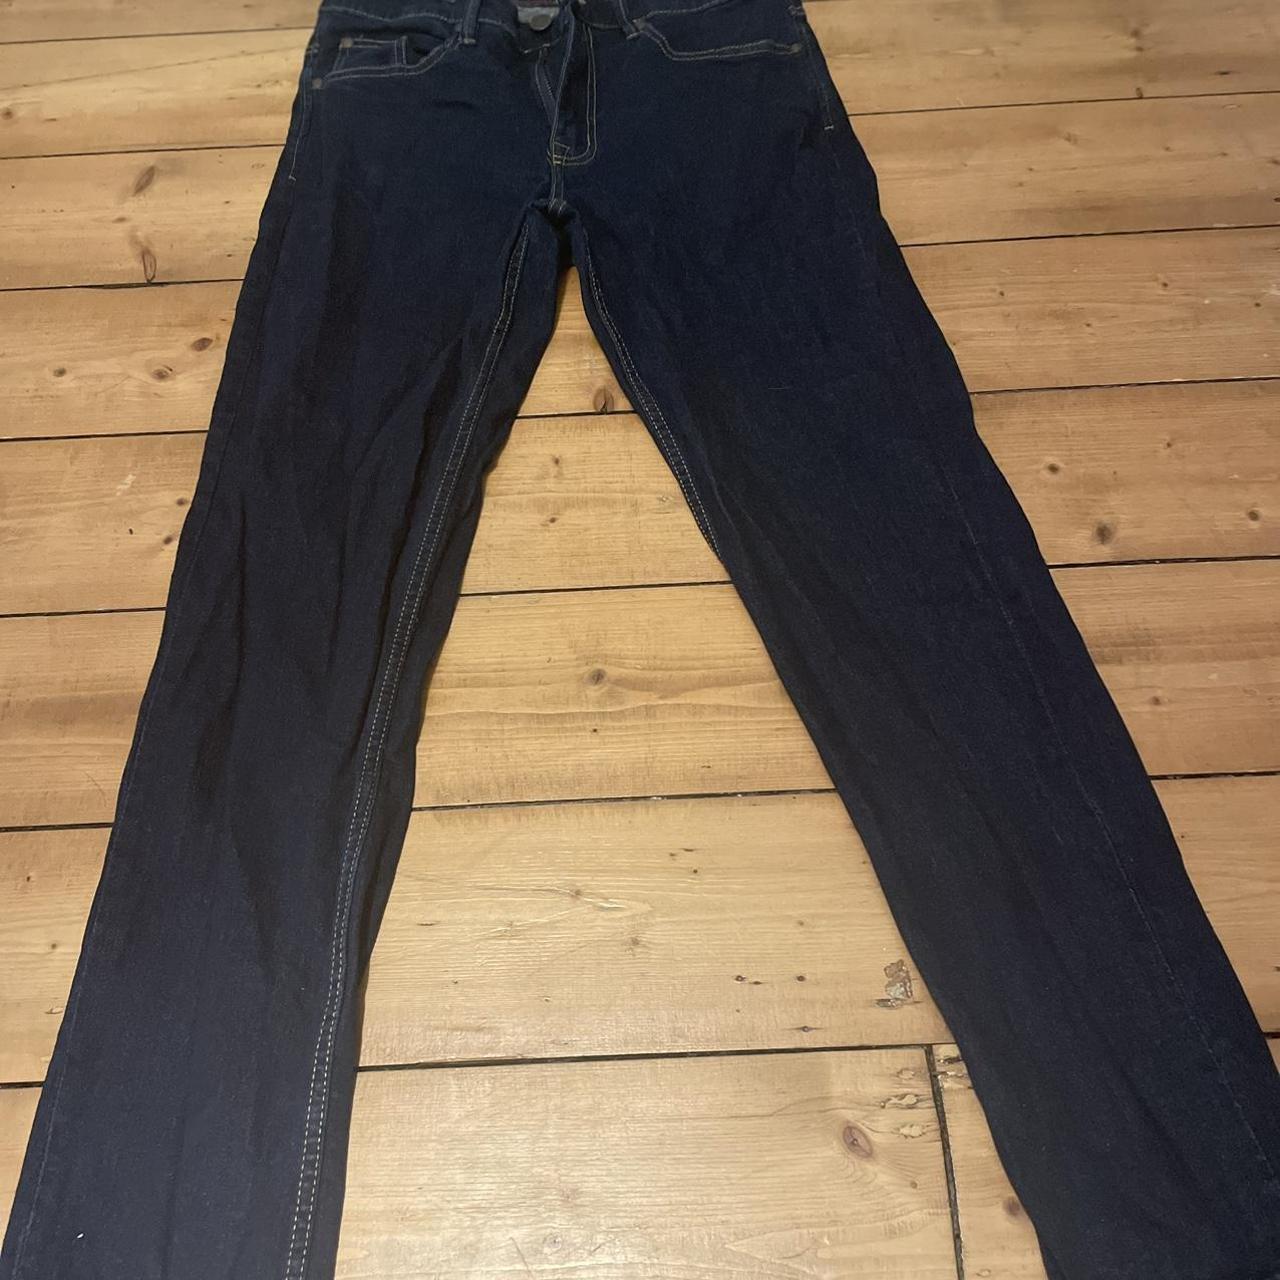 Authentic Ben Sherman jeans Slim fit with 32... - Depop